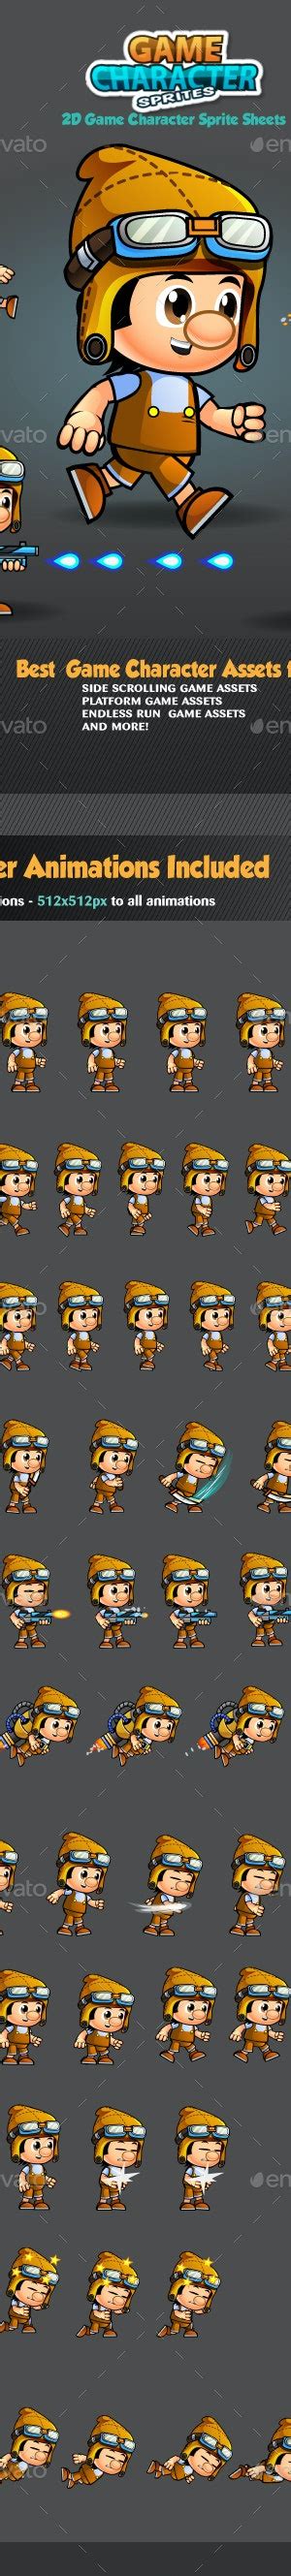 2d game character sprites 256 by pasilan graphicriver